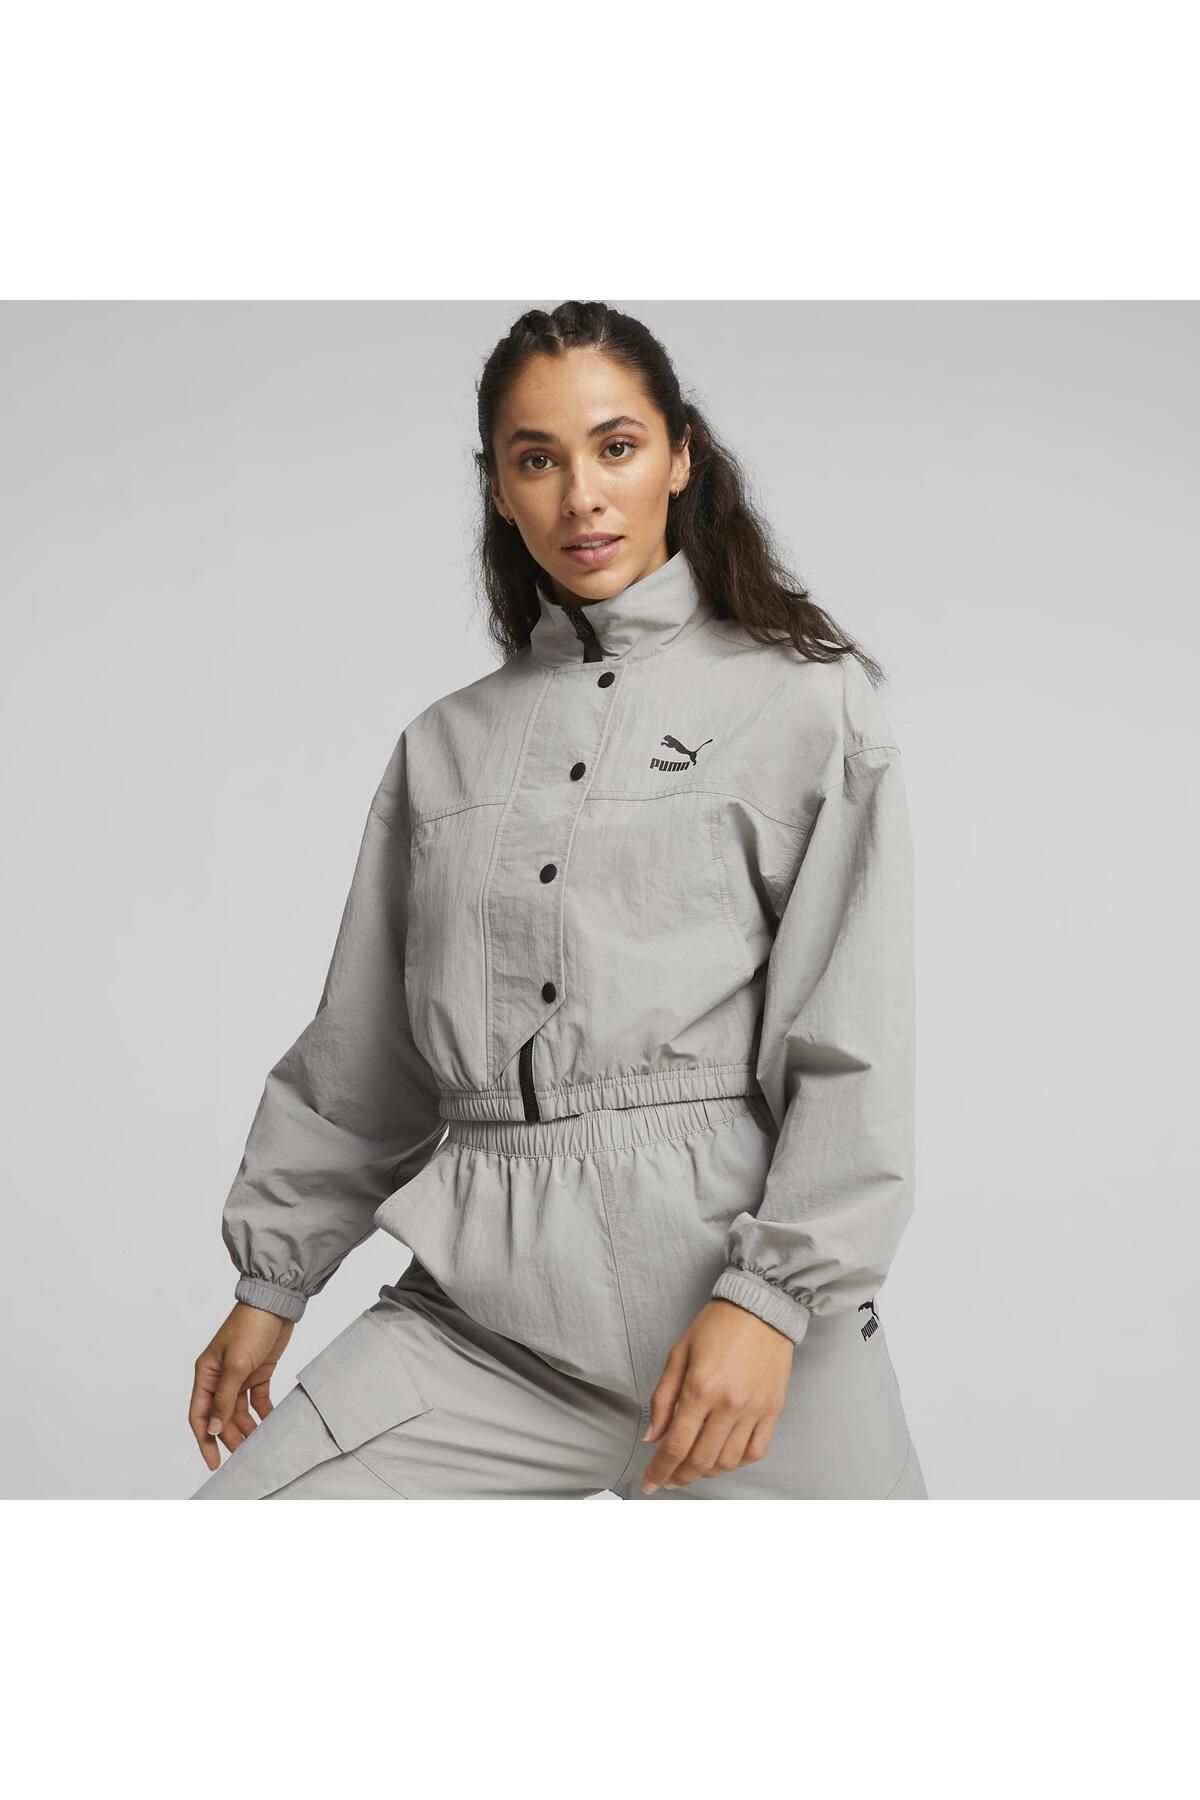 Puma DARE TO Cropped Woven Jacket